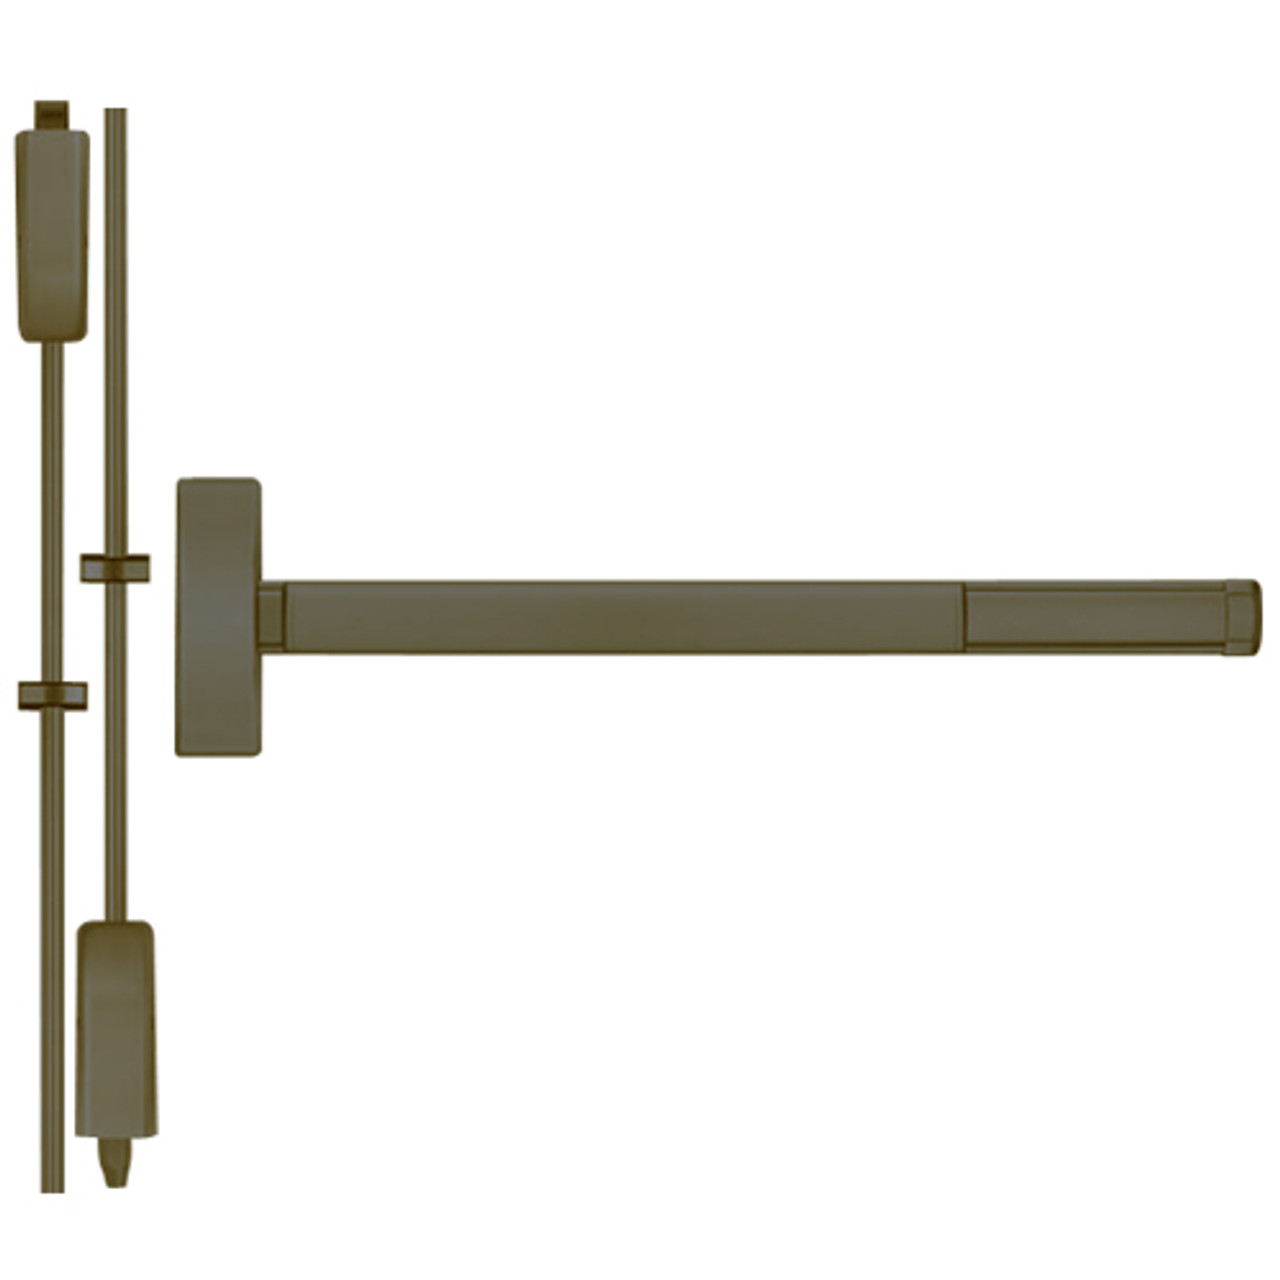 ELRFL2203-613-48 PHI 2200 Series Apex Surface Vertical Rod Device with Electric Latch Retraction Prepped for Key Retracts Latchbolt in Oil Rubbed Bronze Finish